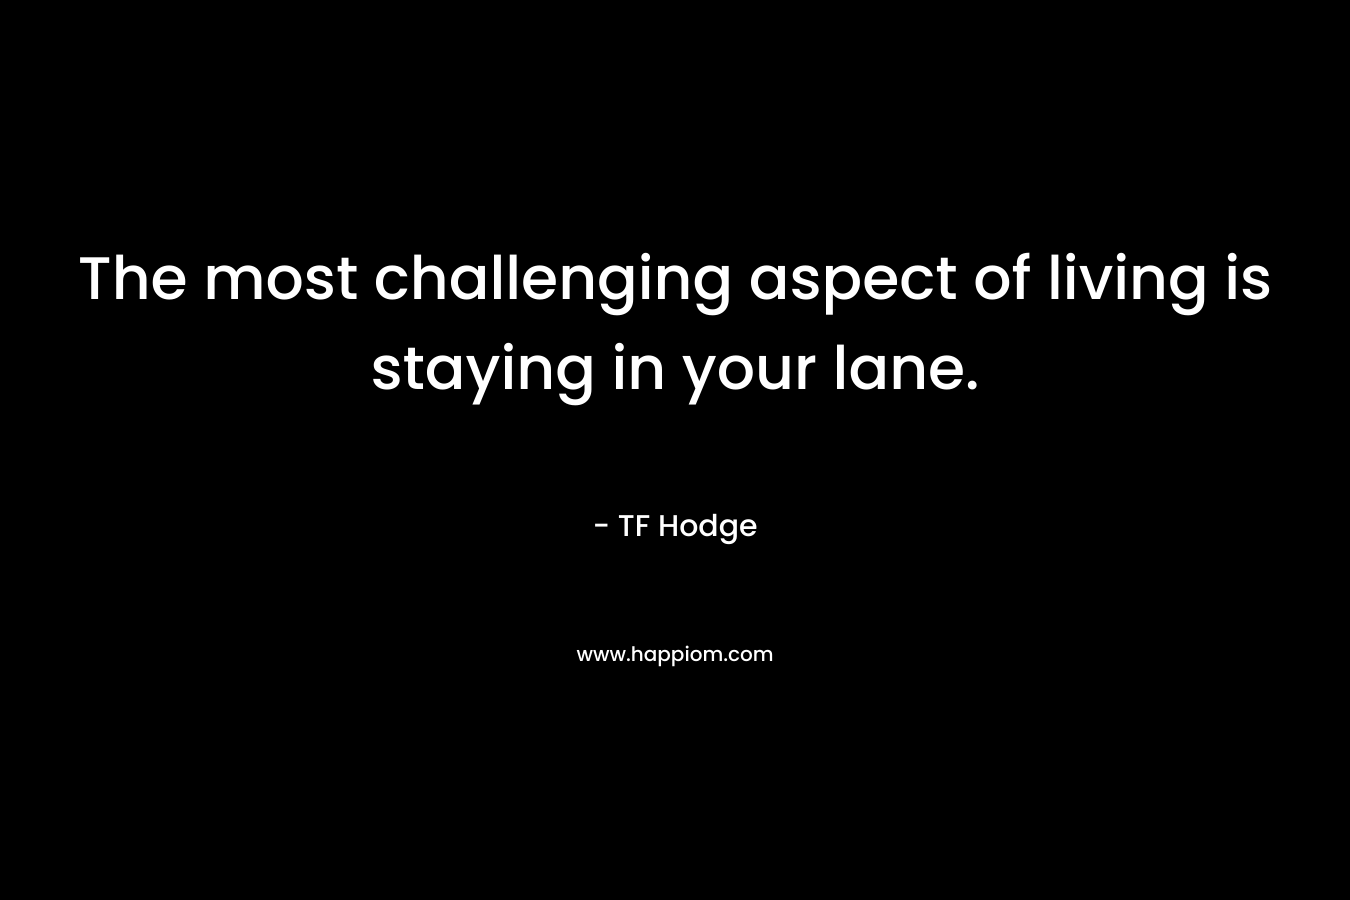 The most challenging aspect of living is staying in your lane.